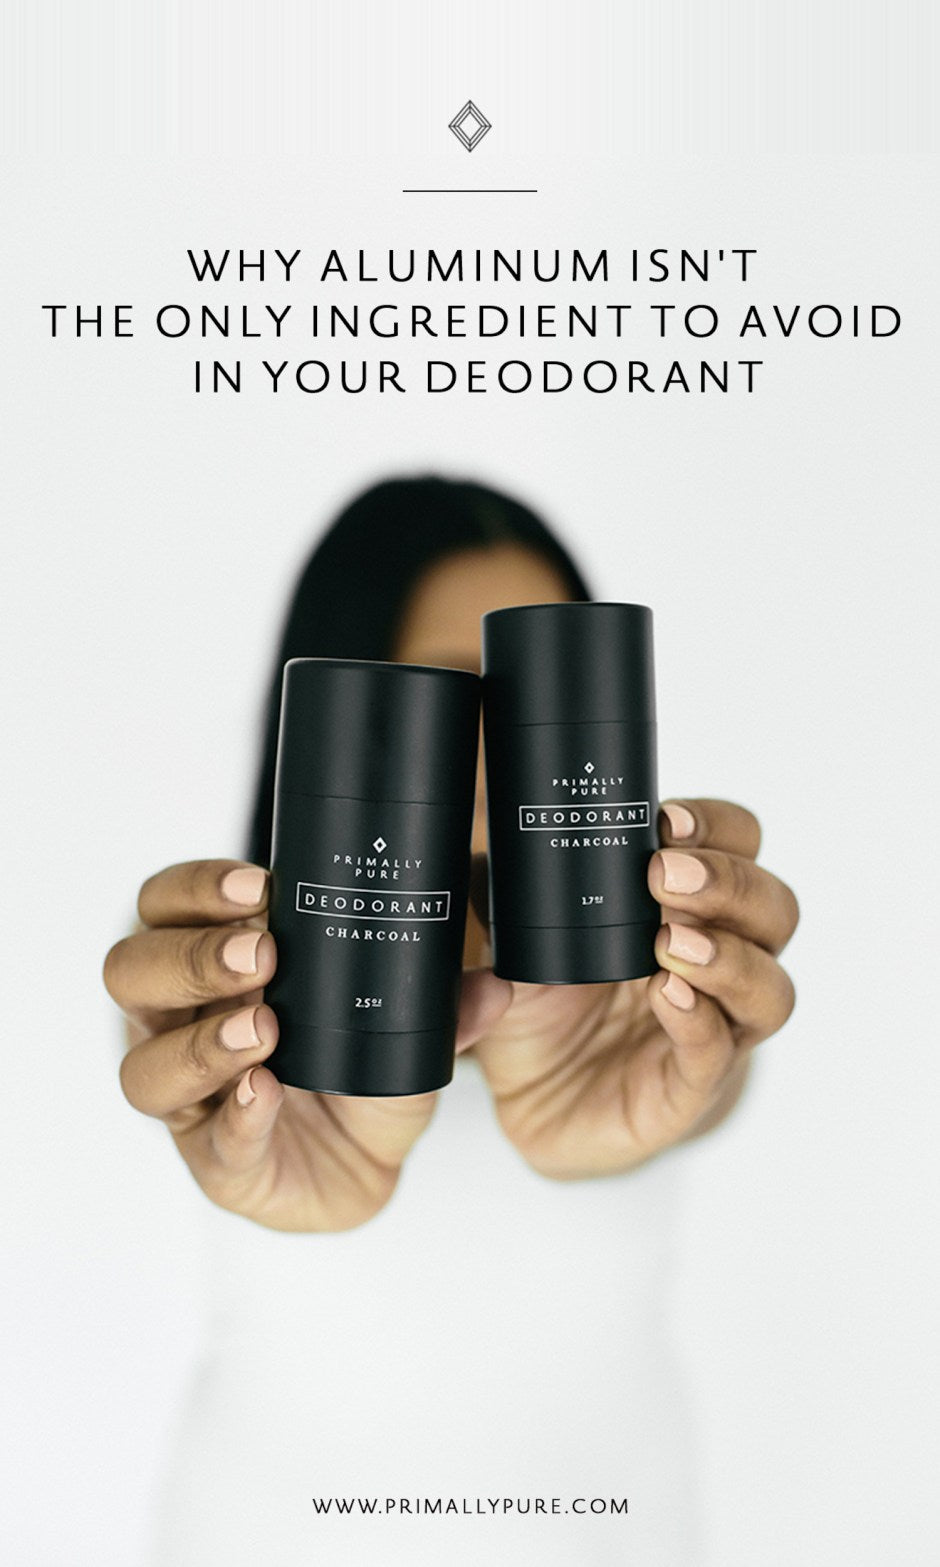 Why Aluminum Isn't The Only Ingredient To Avoid in Deodorant | We've finally learned to avoid aluminum in deodorant, but there are even more unsafe ingredients found in natural deodorant that you never want to apply to your pits. In this post, we share one of the most toxic ingredients in personal care products + why you want avoid more than just aluminum in natural deodorant. | Primally Pure Skincare